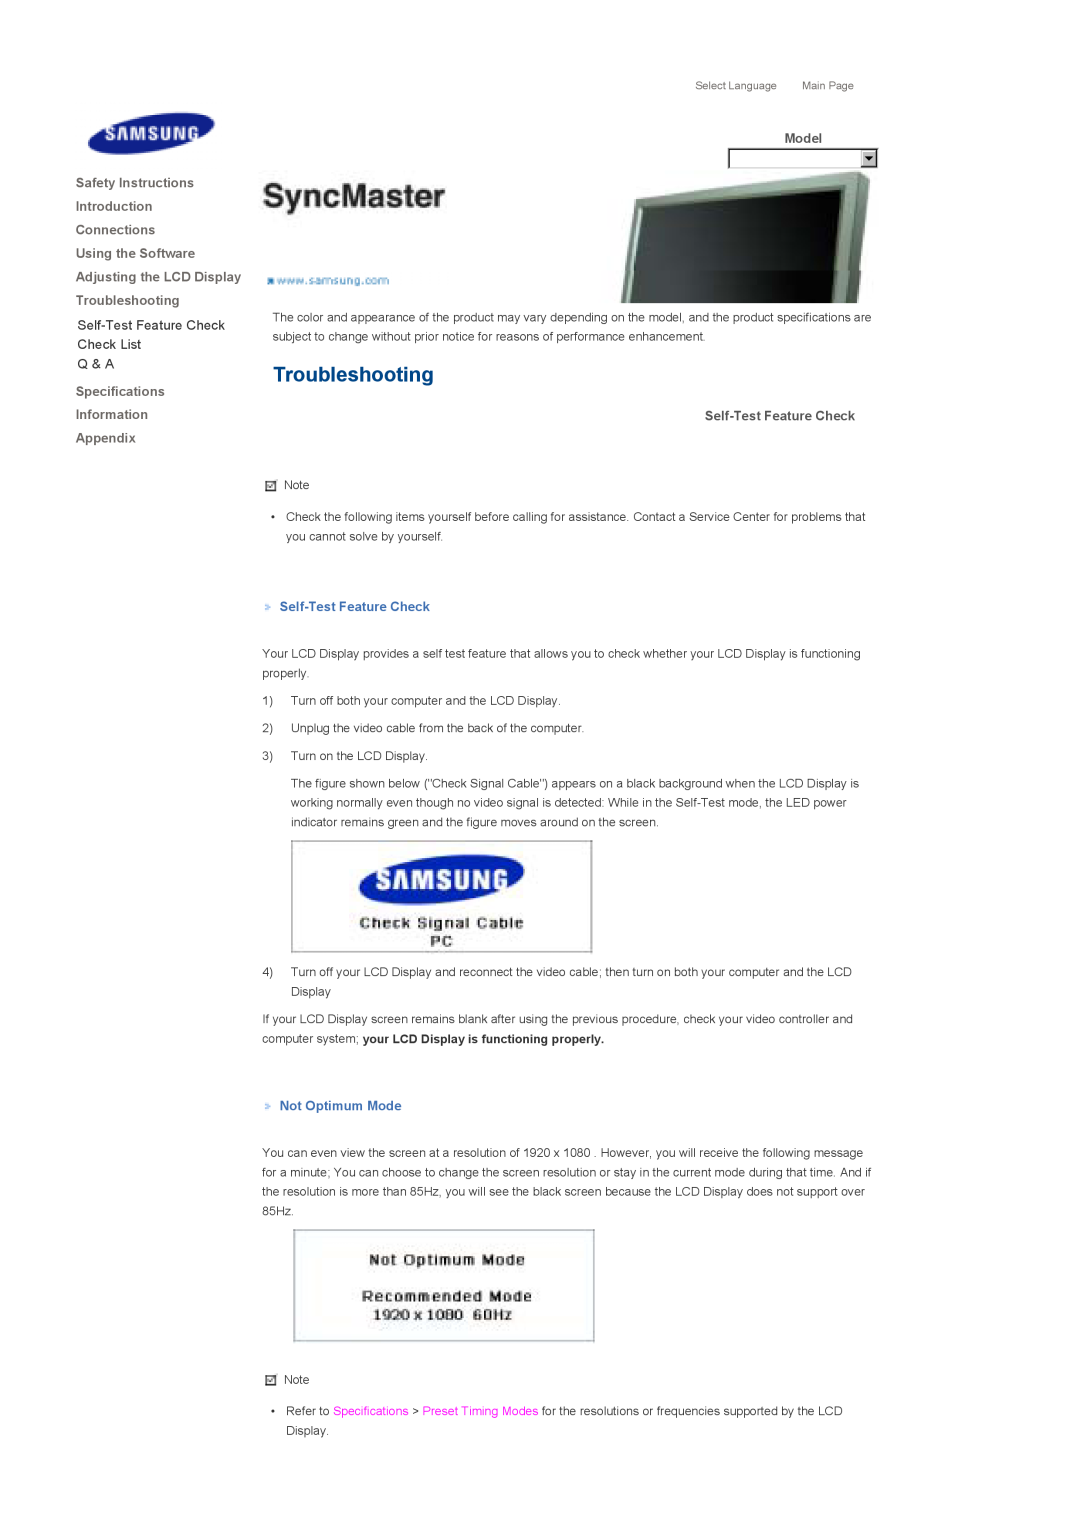 Samsung 820DXN Troubleshooting, Safety Instructions Introduction Connections Using the Software, Model, Not Optimum Mode 